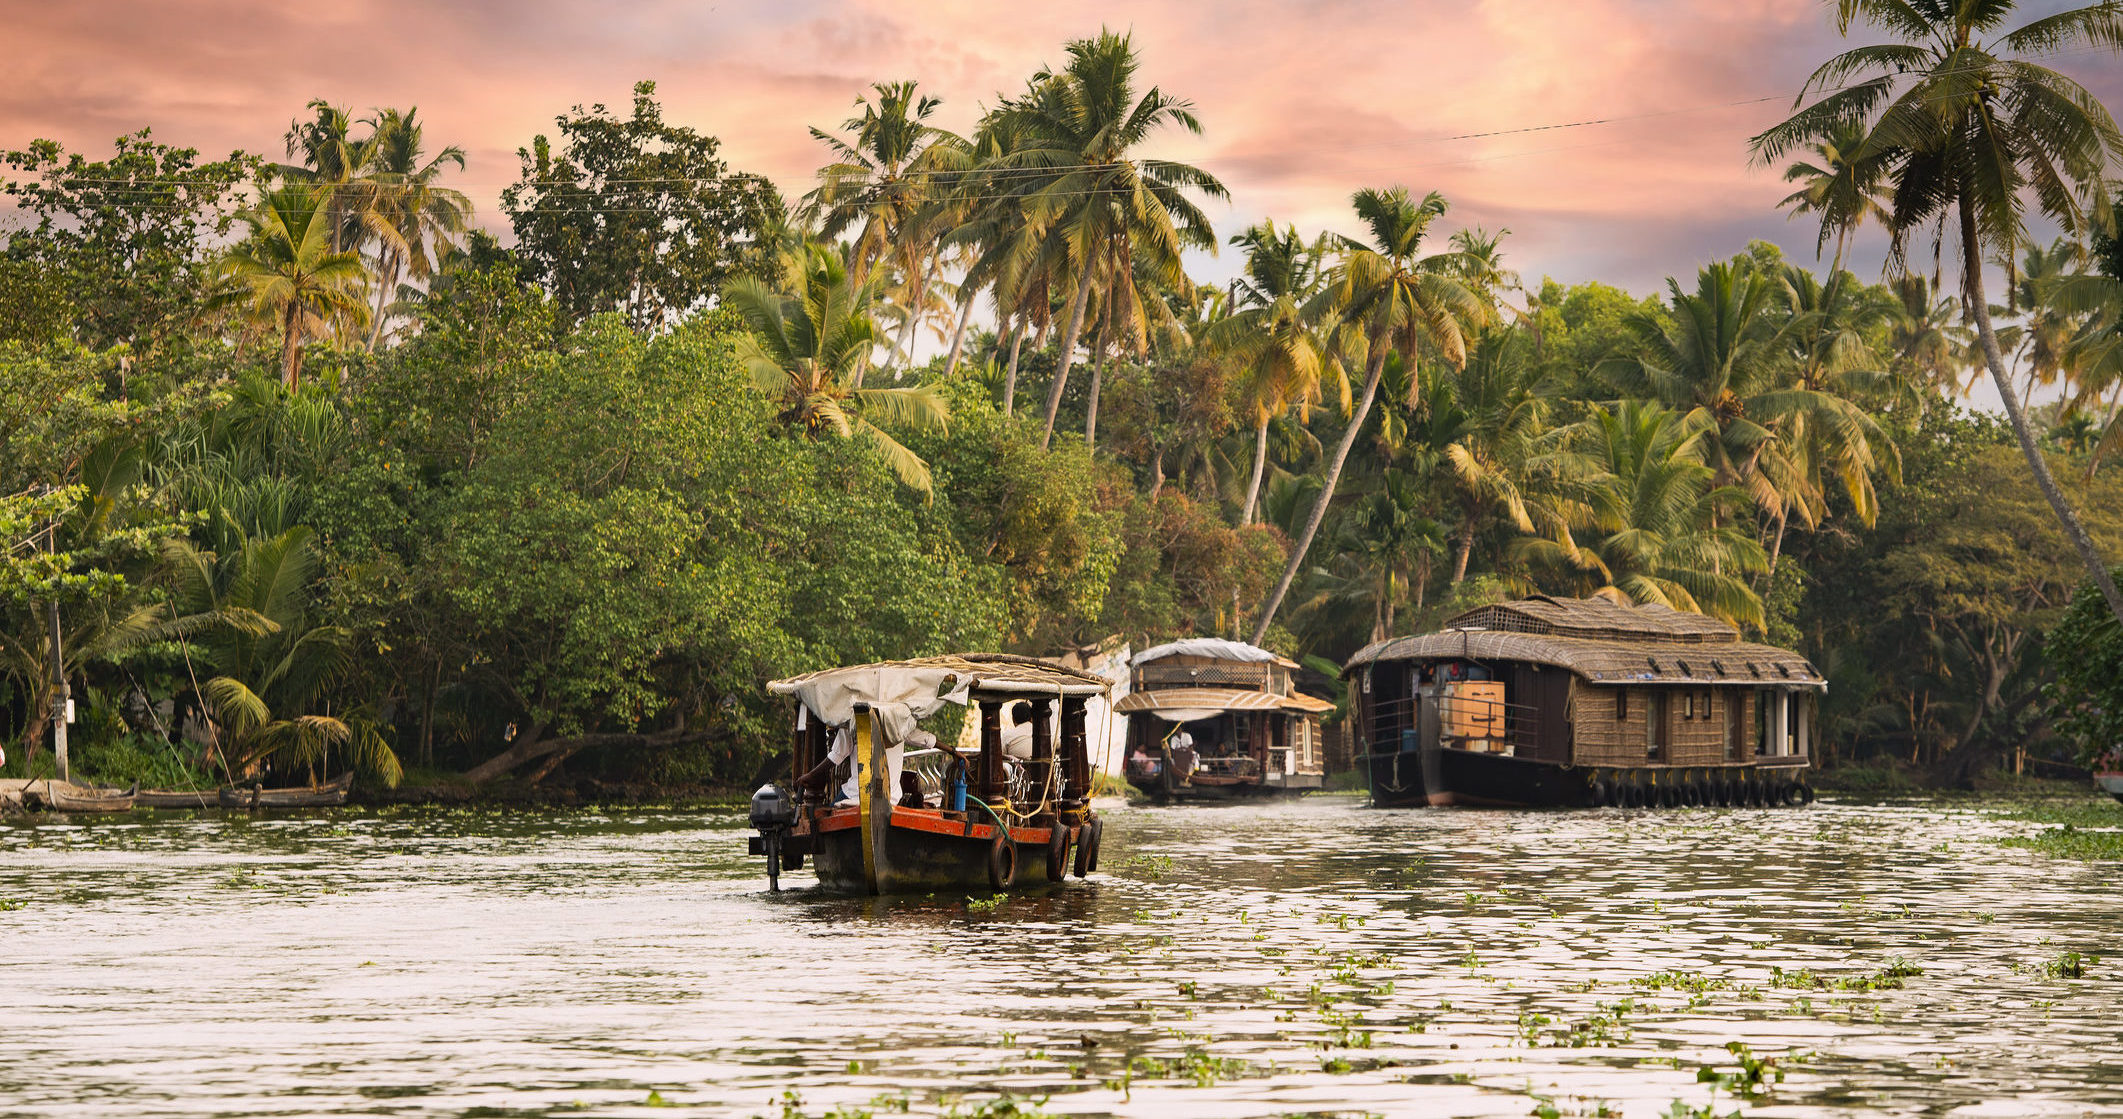 Experience extraordinary Indian landscape like these palm-fringed backwaters in Alleppey when you take a tailor-made holiday with Alfred&.